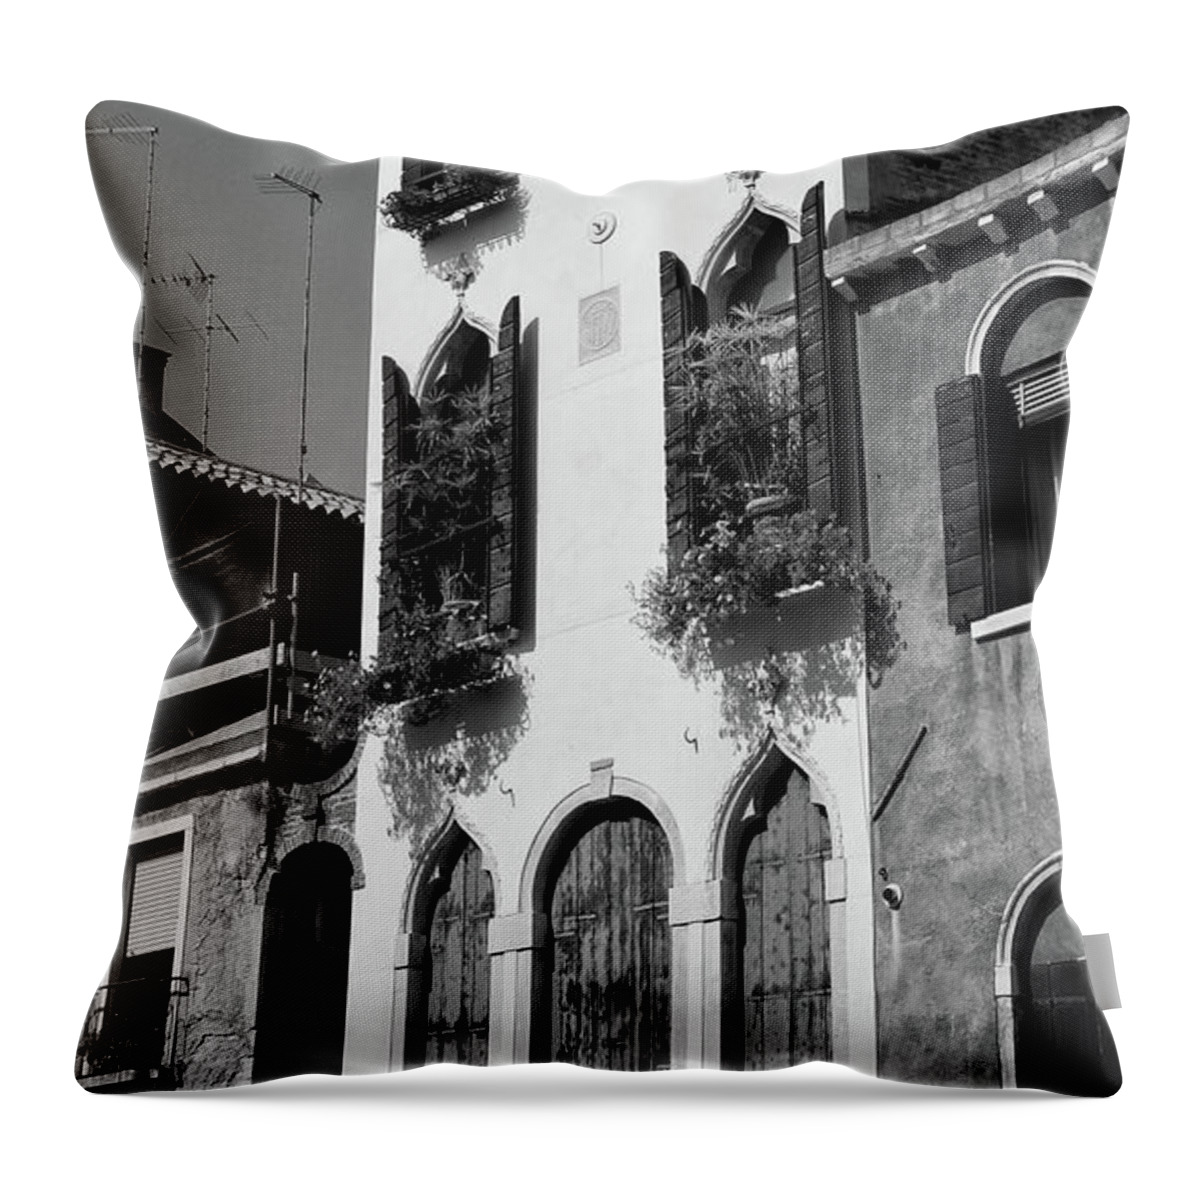 Venice Throw Pillow featuring the photograph Decorated Historic Venetian Home in Venice Italy Black and White by Shawn O'Brien